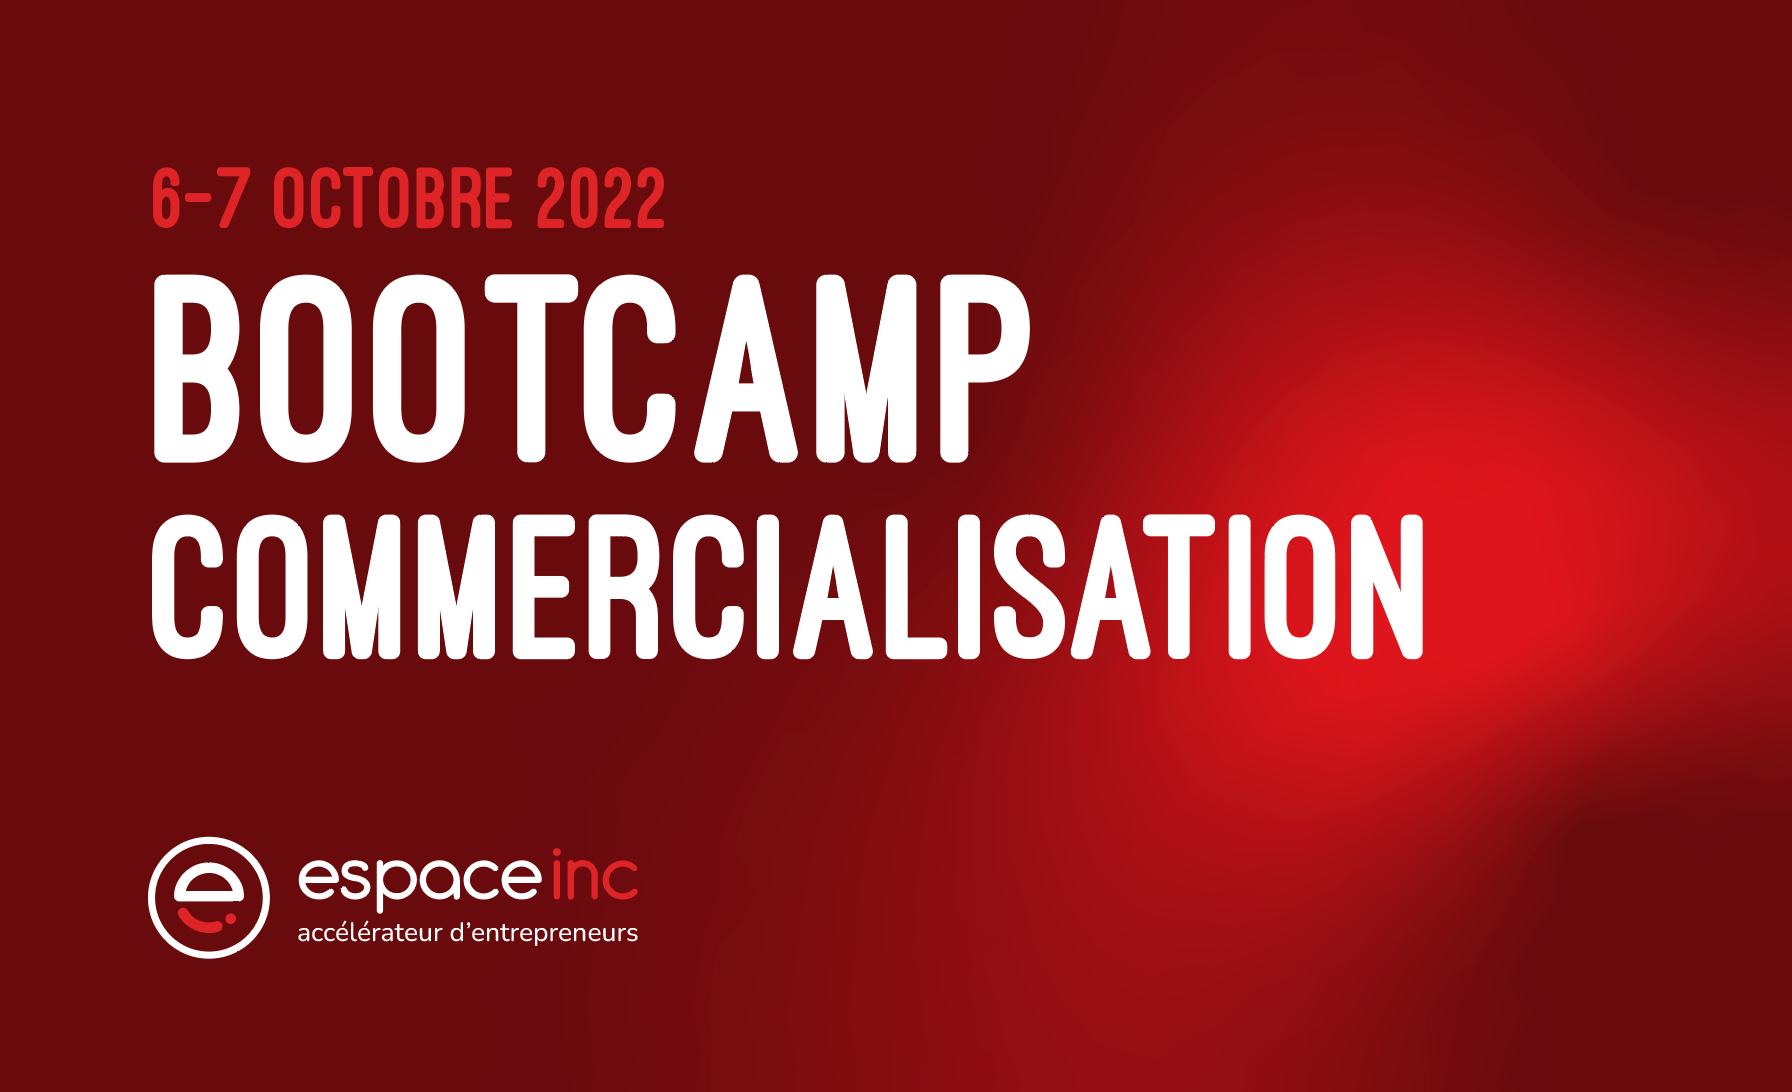 Bootcamp commercialisation